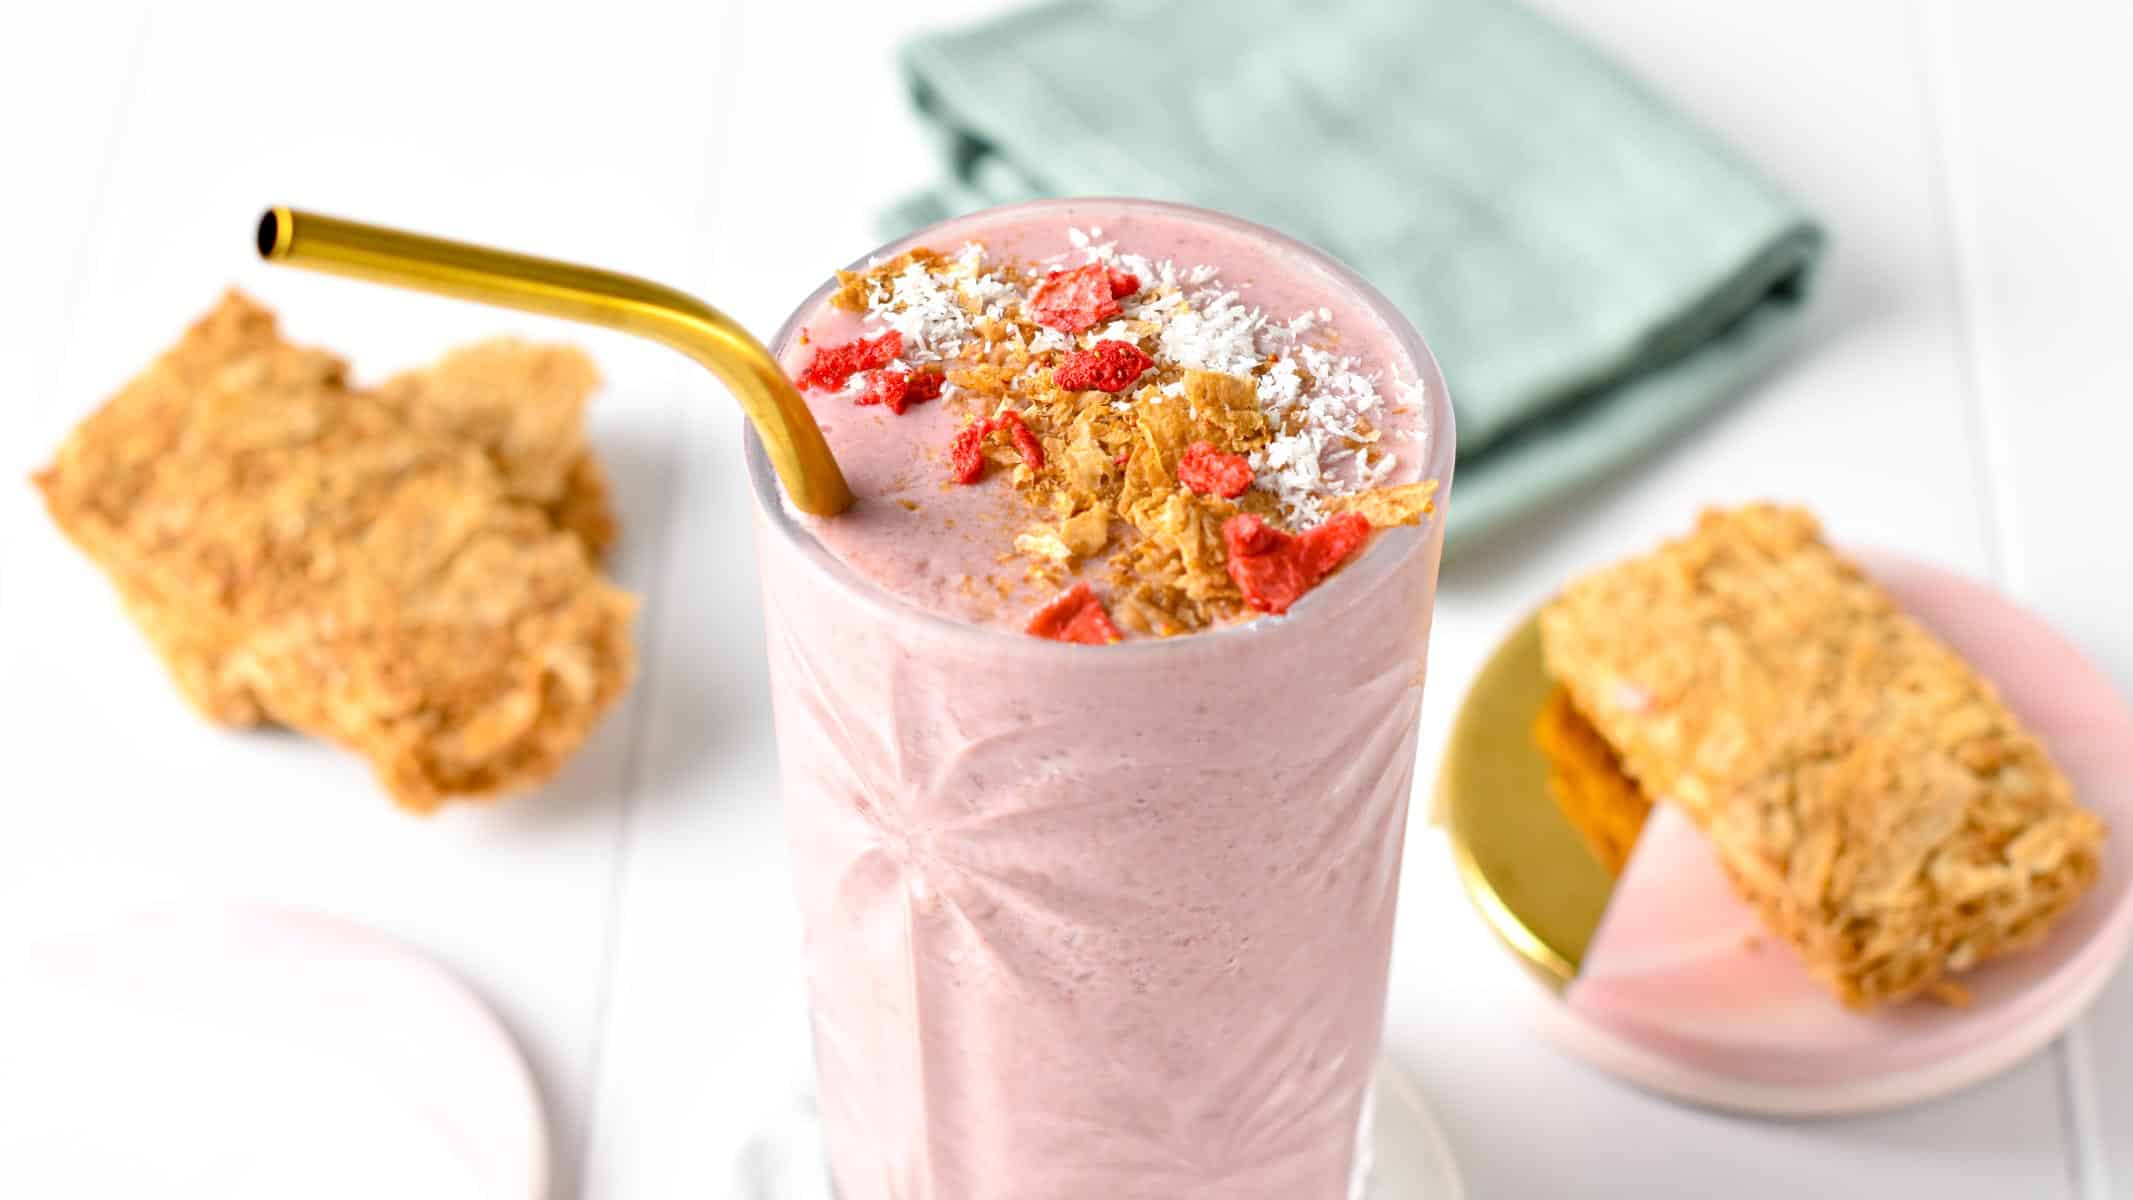 This WeetBix Smoothie is a delicious, thick, and creamy strawberry breakfast smoothie packed with tasty wheat biscuit flavor. It contains all you need to start the day with 8 grams of proteins and 8 grams of fiber to keep you full for hours.